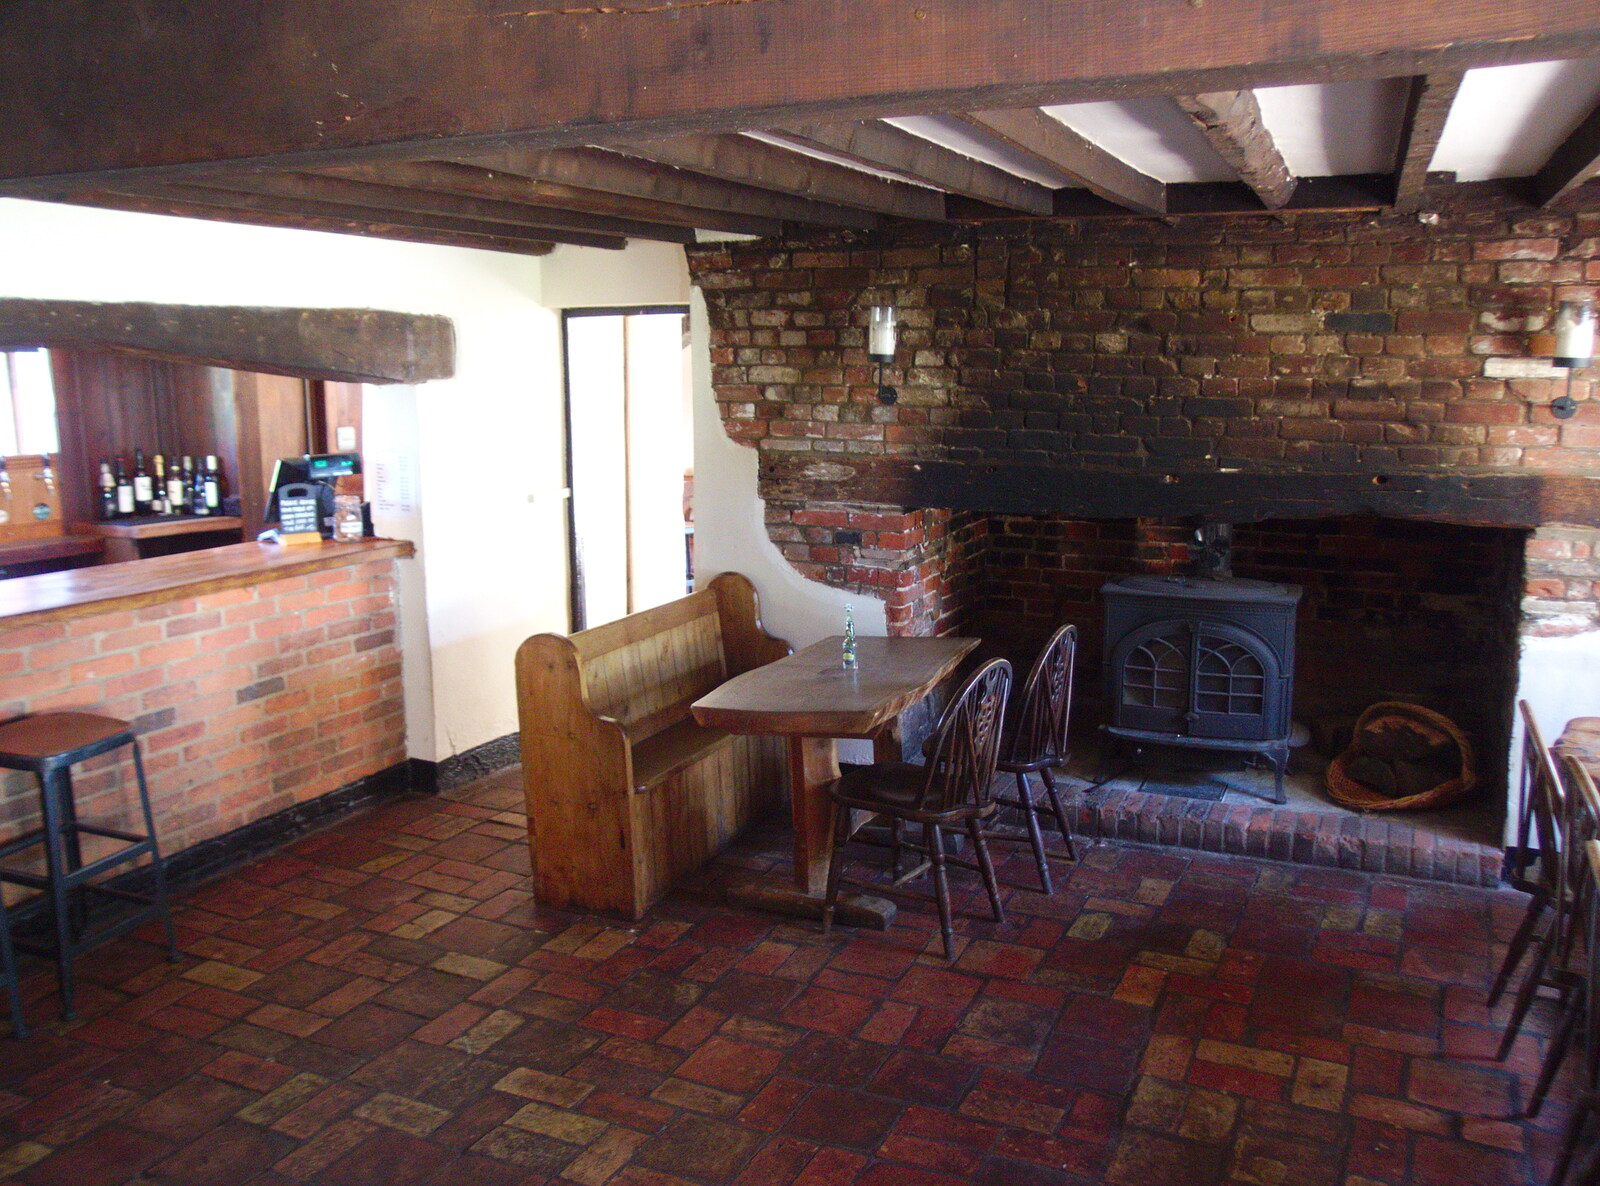 The Locks' bar and fireplace from Camping at Three Rivers, Geldeston, Norfolk - 1st June 2019